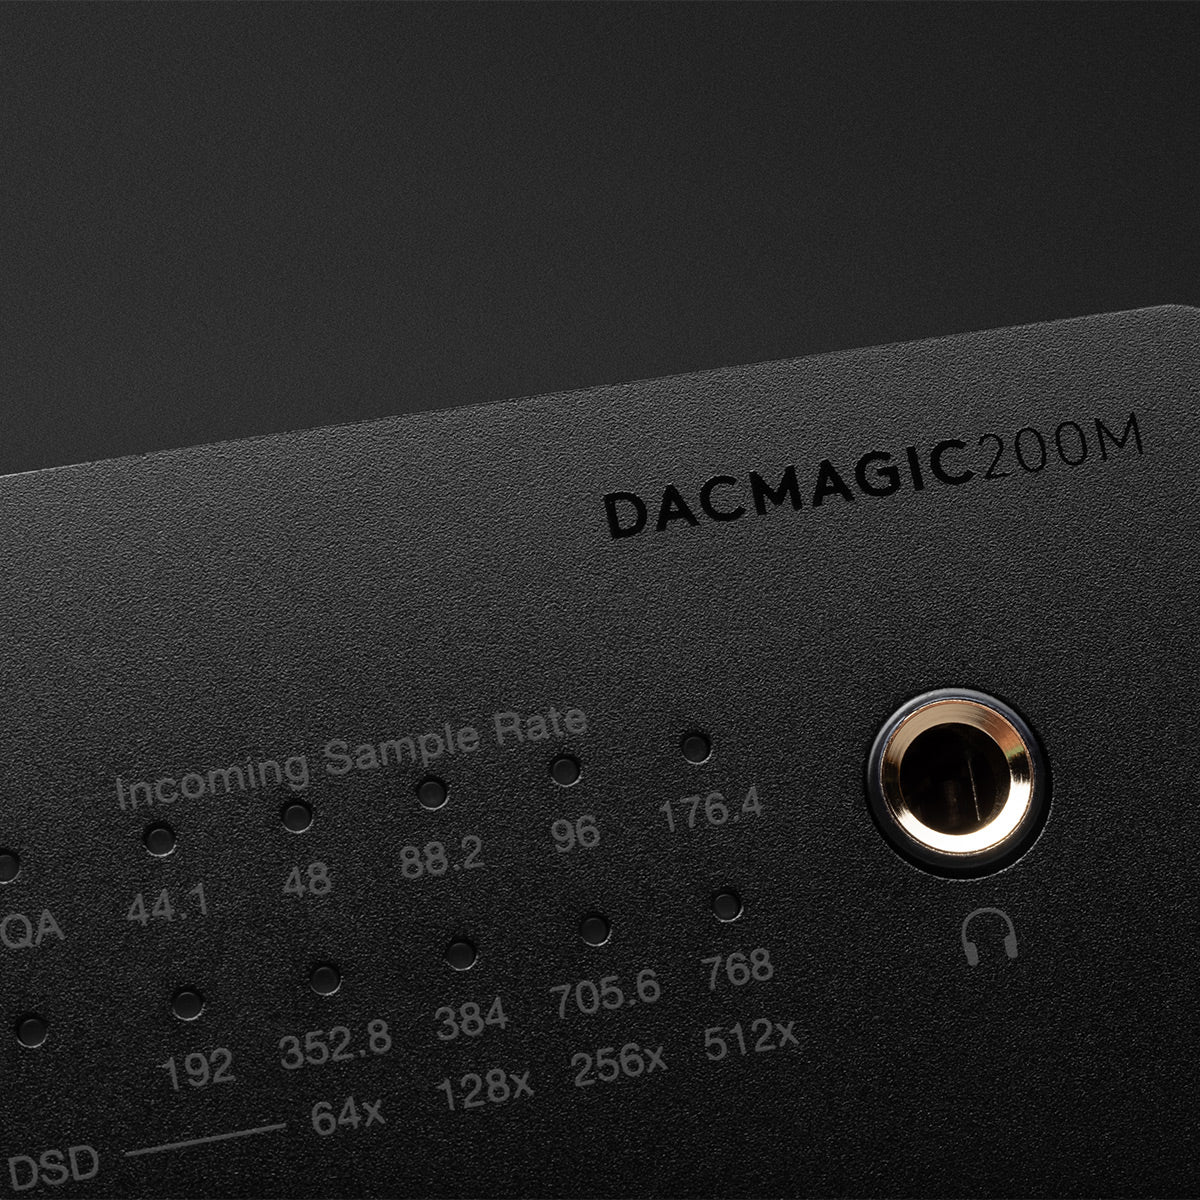 Cambridge Audio DacMagic 200M Digital-to-Audio Converter and Preamplifier with Bluetooth aptX with MXN10 Bluetooth Network Player (Limited Edition Black)